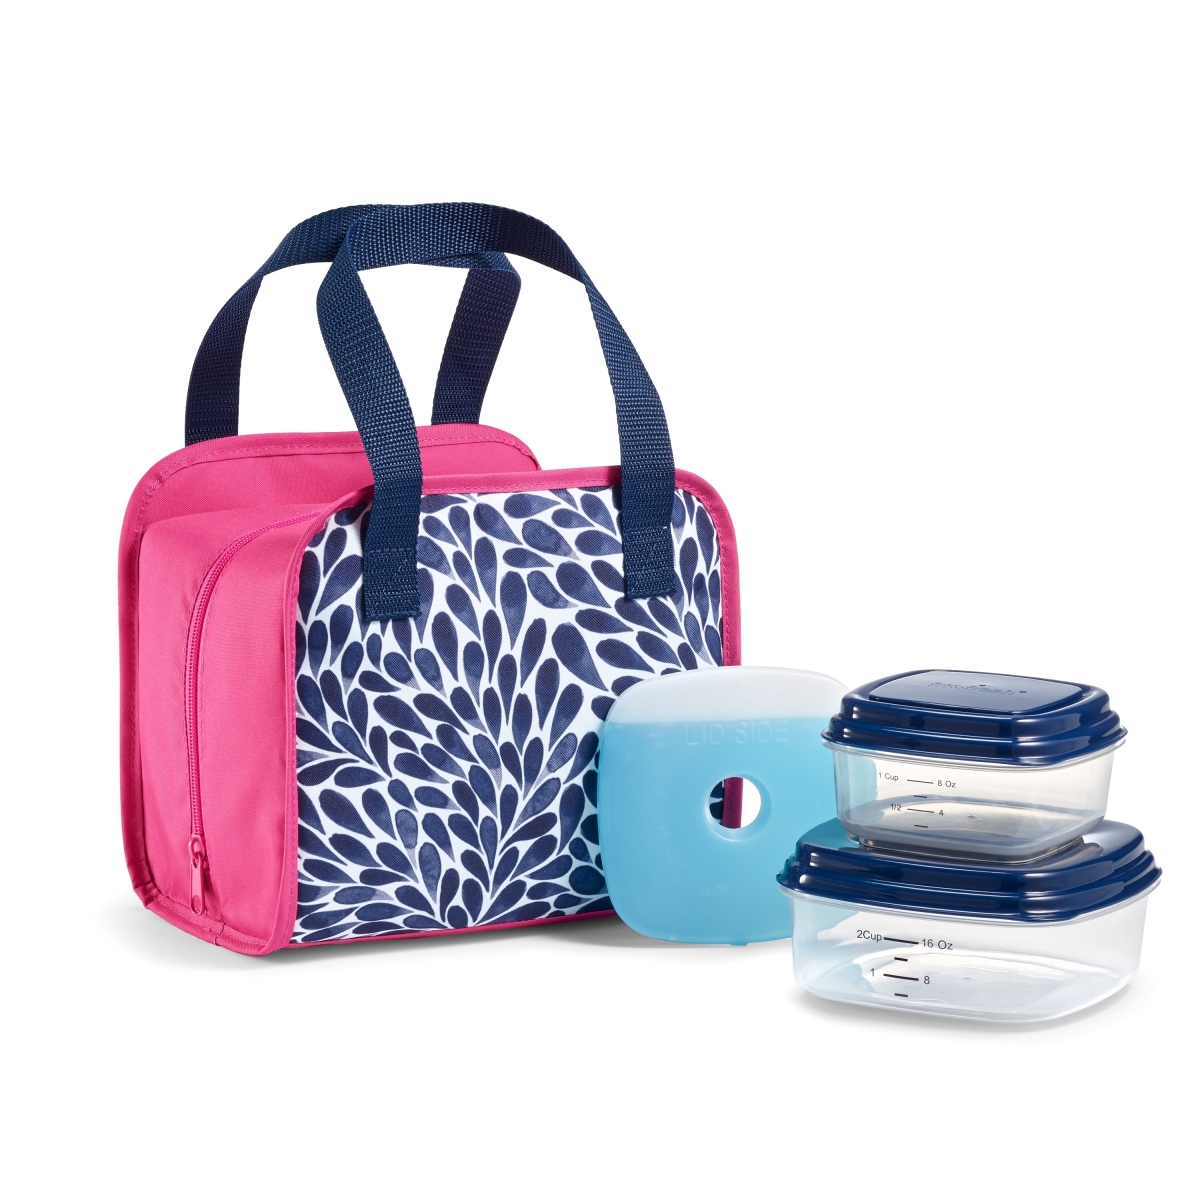 7031ff2419 Fit & Fresh Pembroke Lunch Bag Kit With Bpa-free Containers In Navy Petal Shower